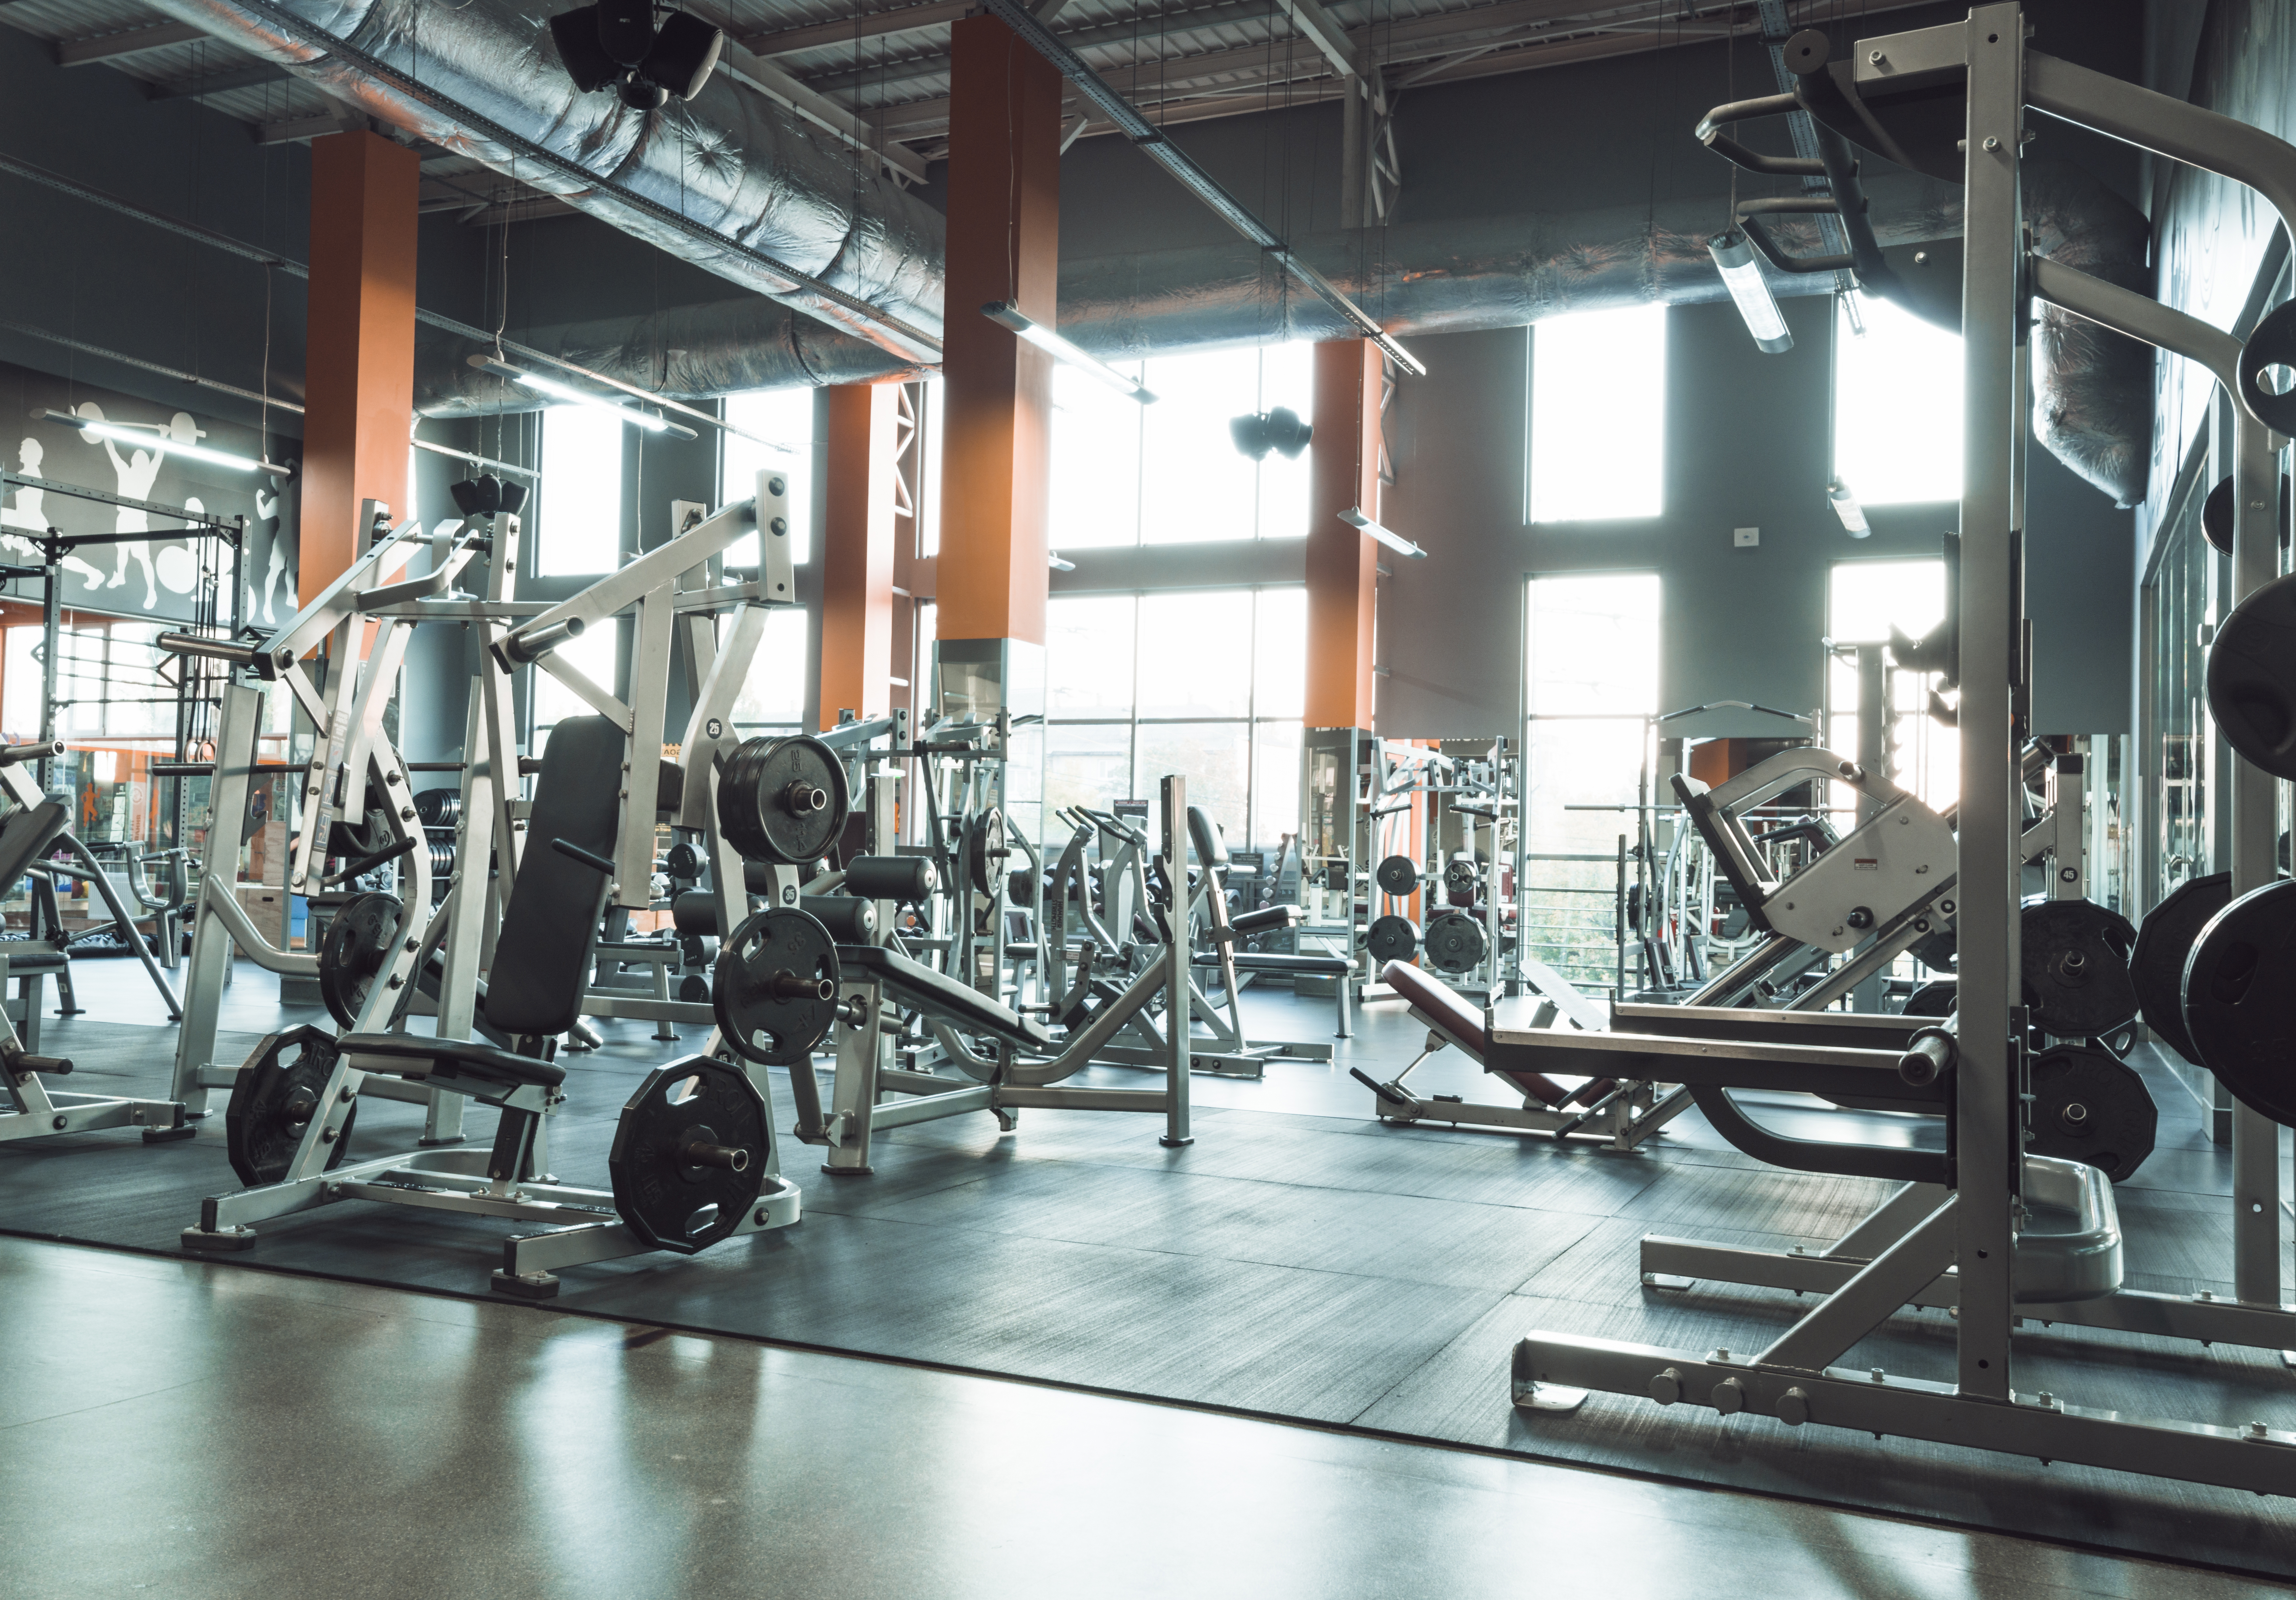 The Complete Guide: How To Open A Gym The Right Way